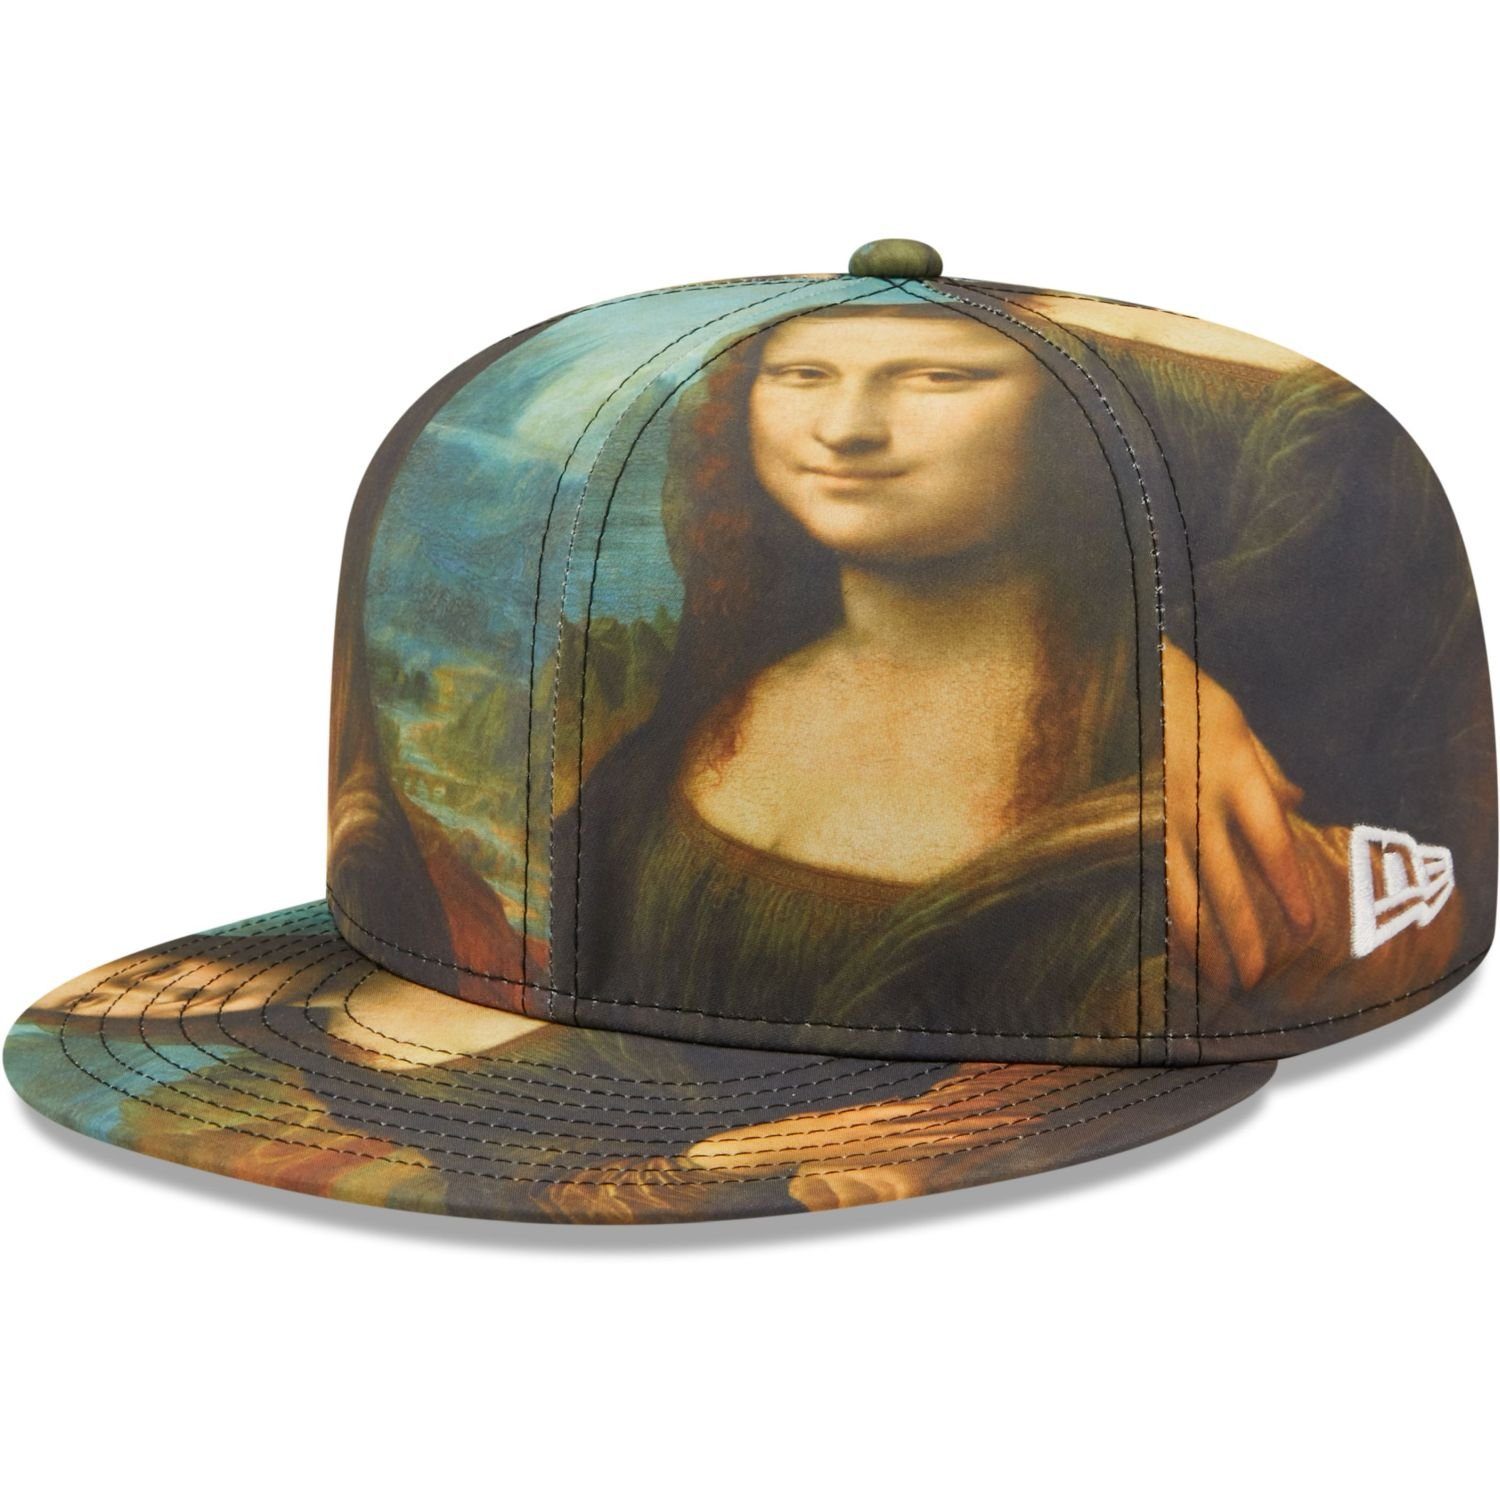 New Era Fitted Cap 59Fifty LE LOUVRE Mona Lisa